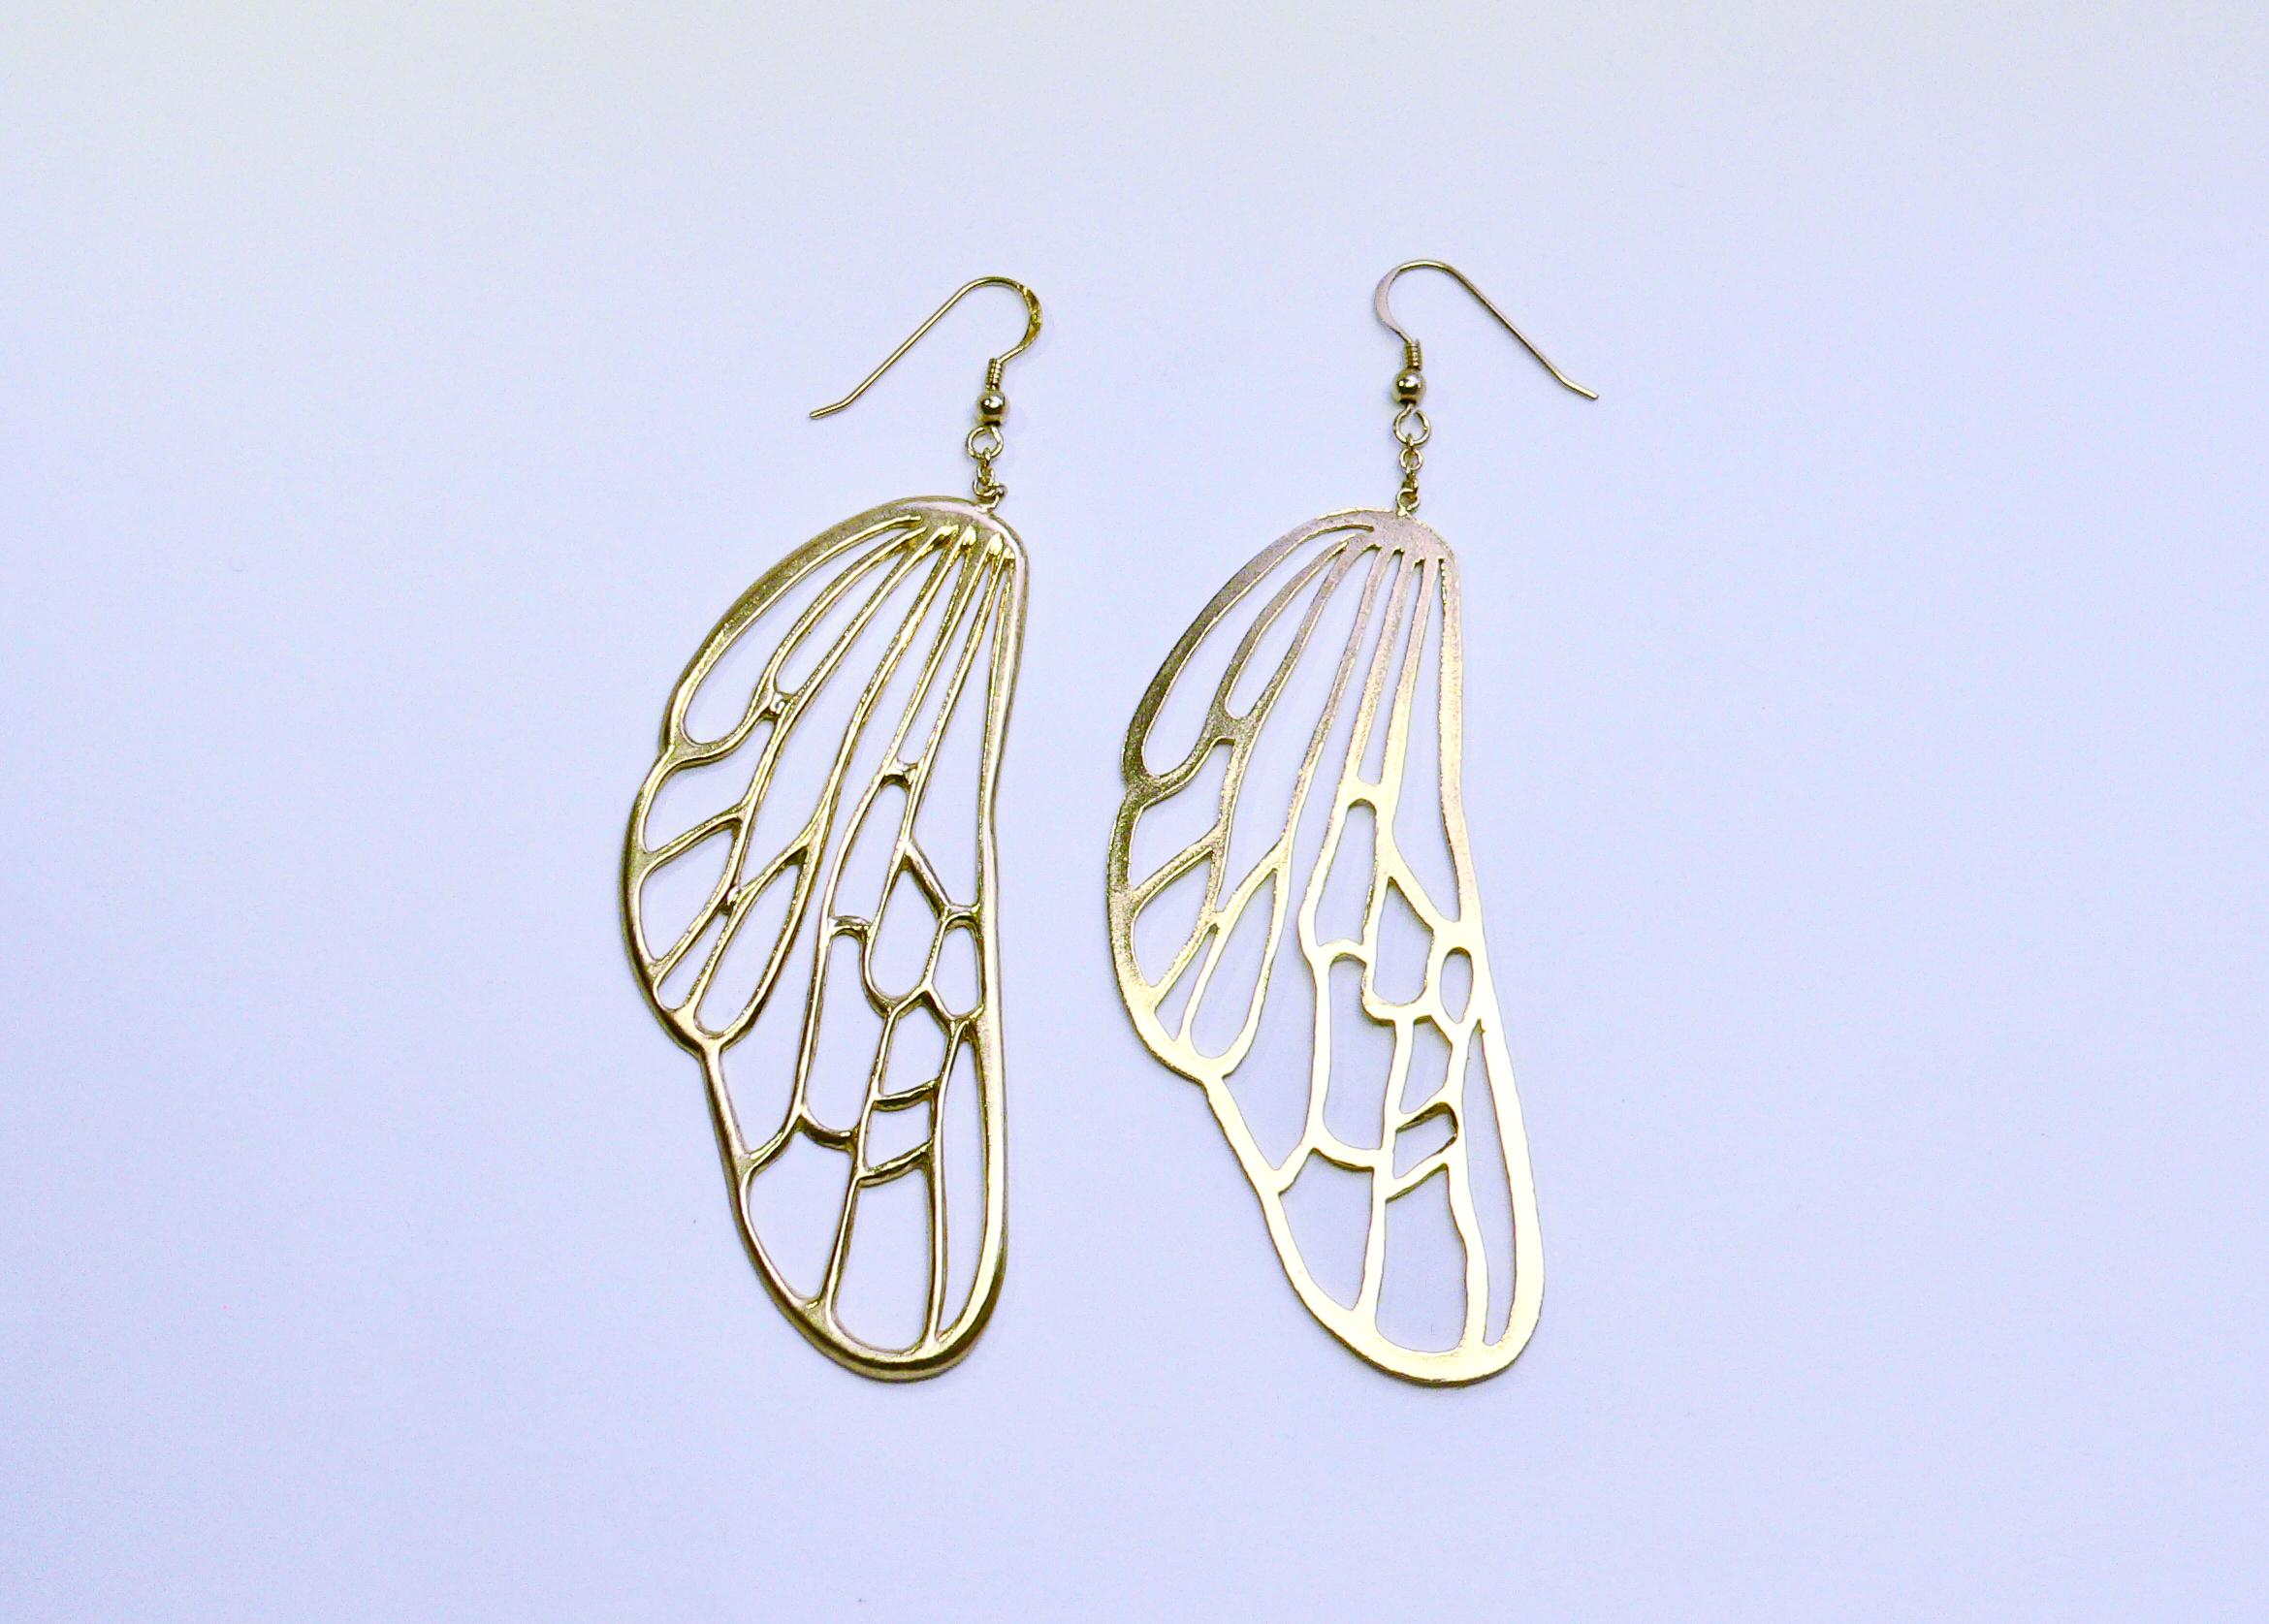 Bee wing earring from Bee Collection is made of Sterling Silver with 18 Karat gold plated. It is a motif of bee wings.

The size is about 95mm length, 30mm width, 1mm thickness and 6.5 grams by each item.

